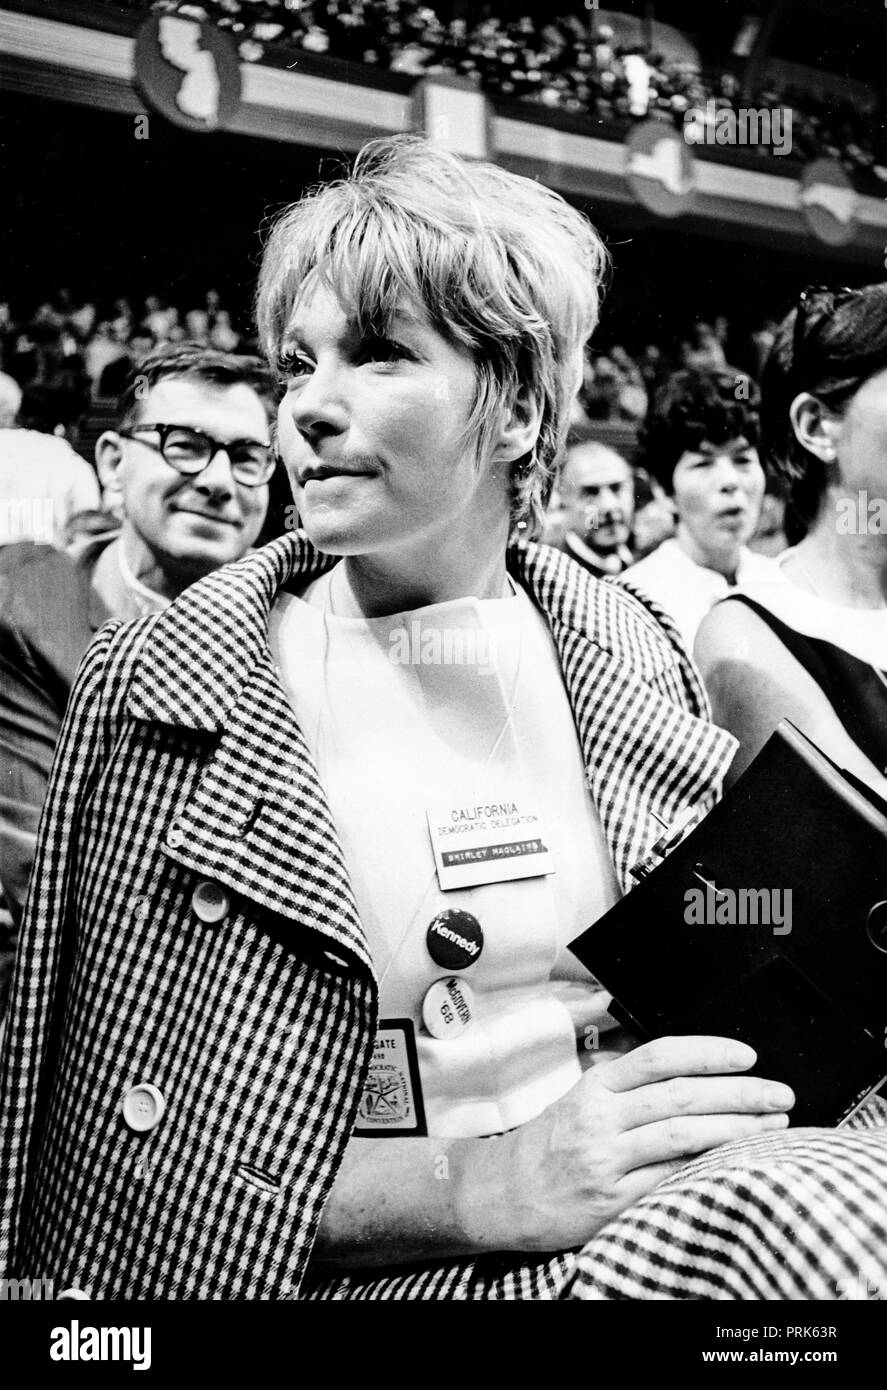 shirley maclaine attends a national democratic convention, chicago, illinois, 1968 Stock Photo